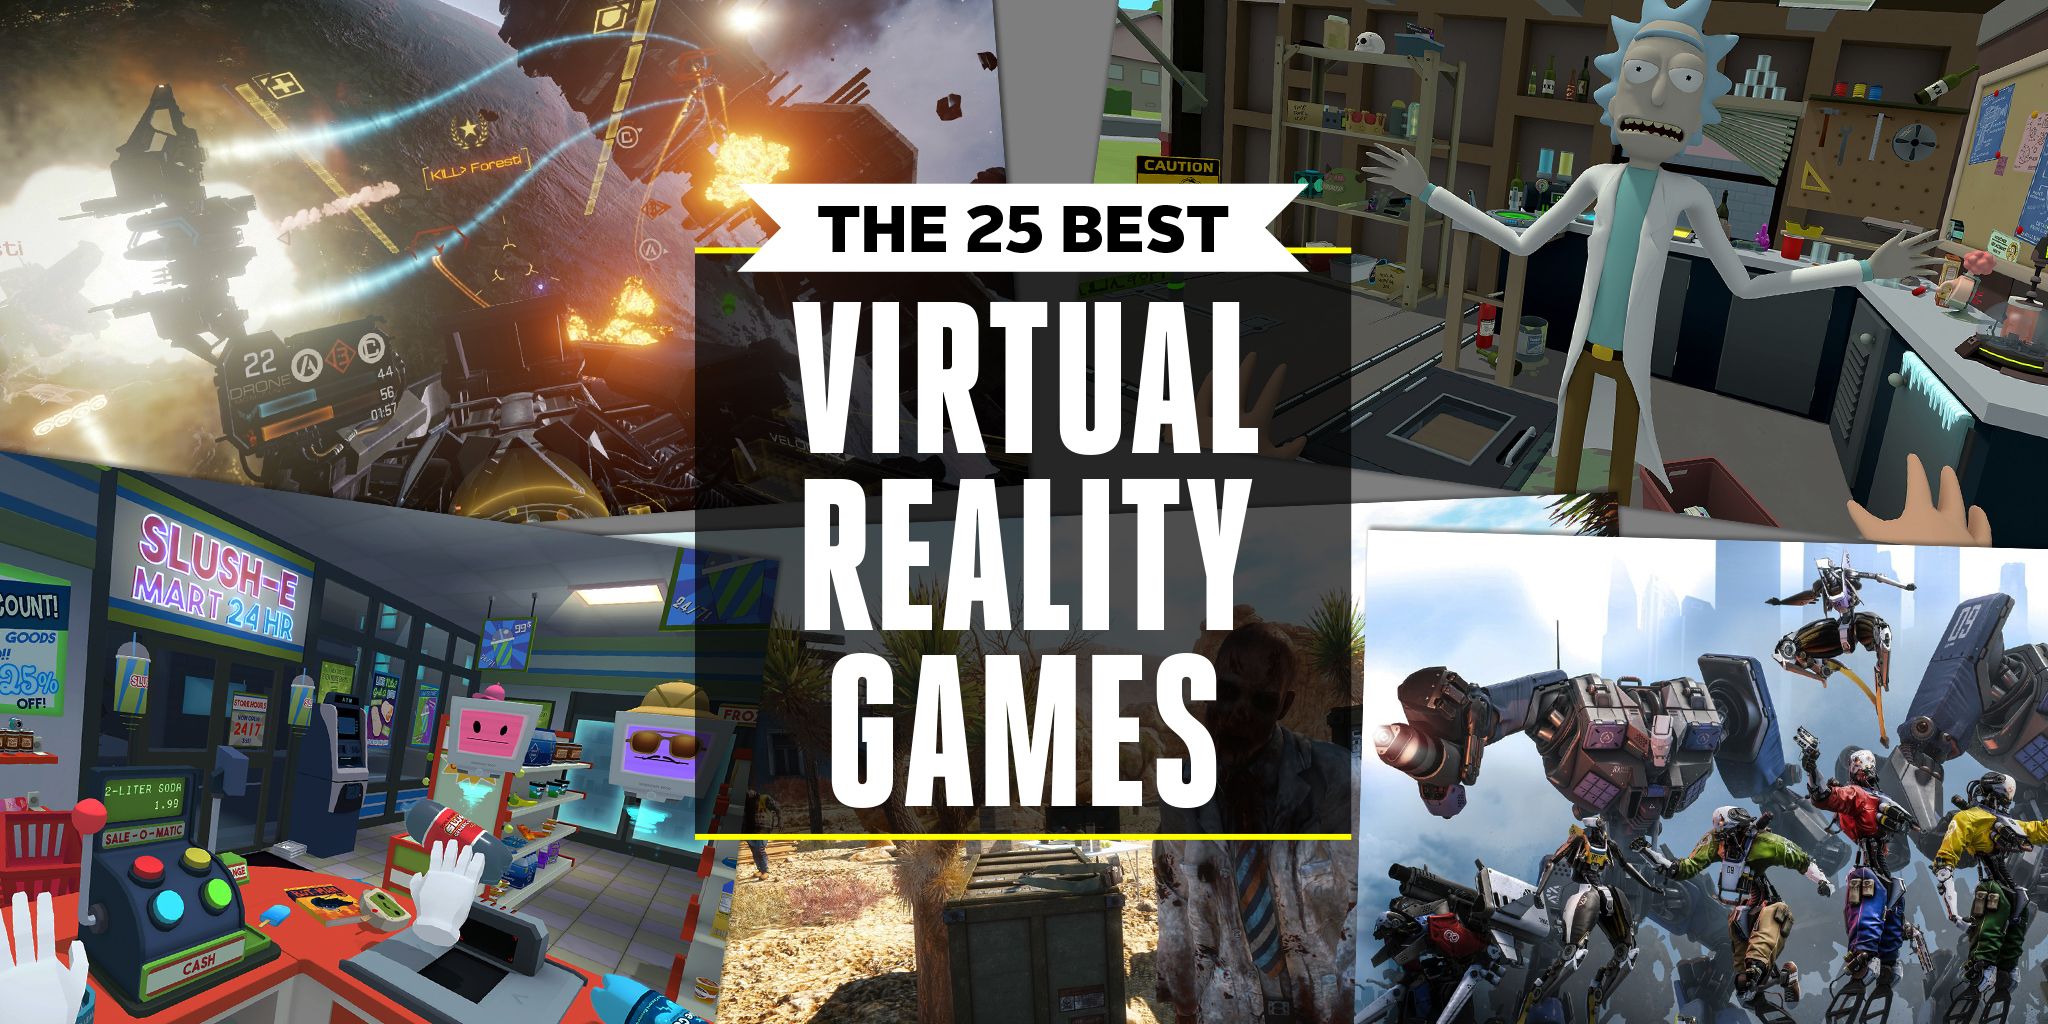 forvisning Feje Termisk 25 Best VR Games 2019 | PC, PS4 Virtual Reality Game Reviews